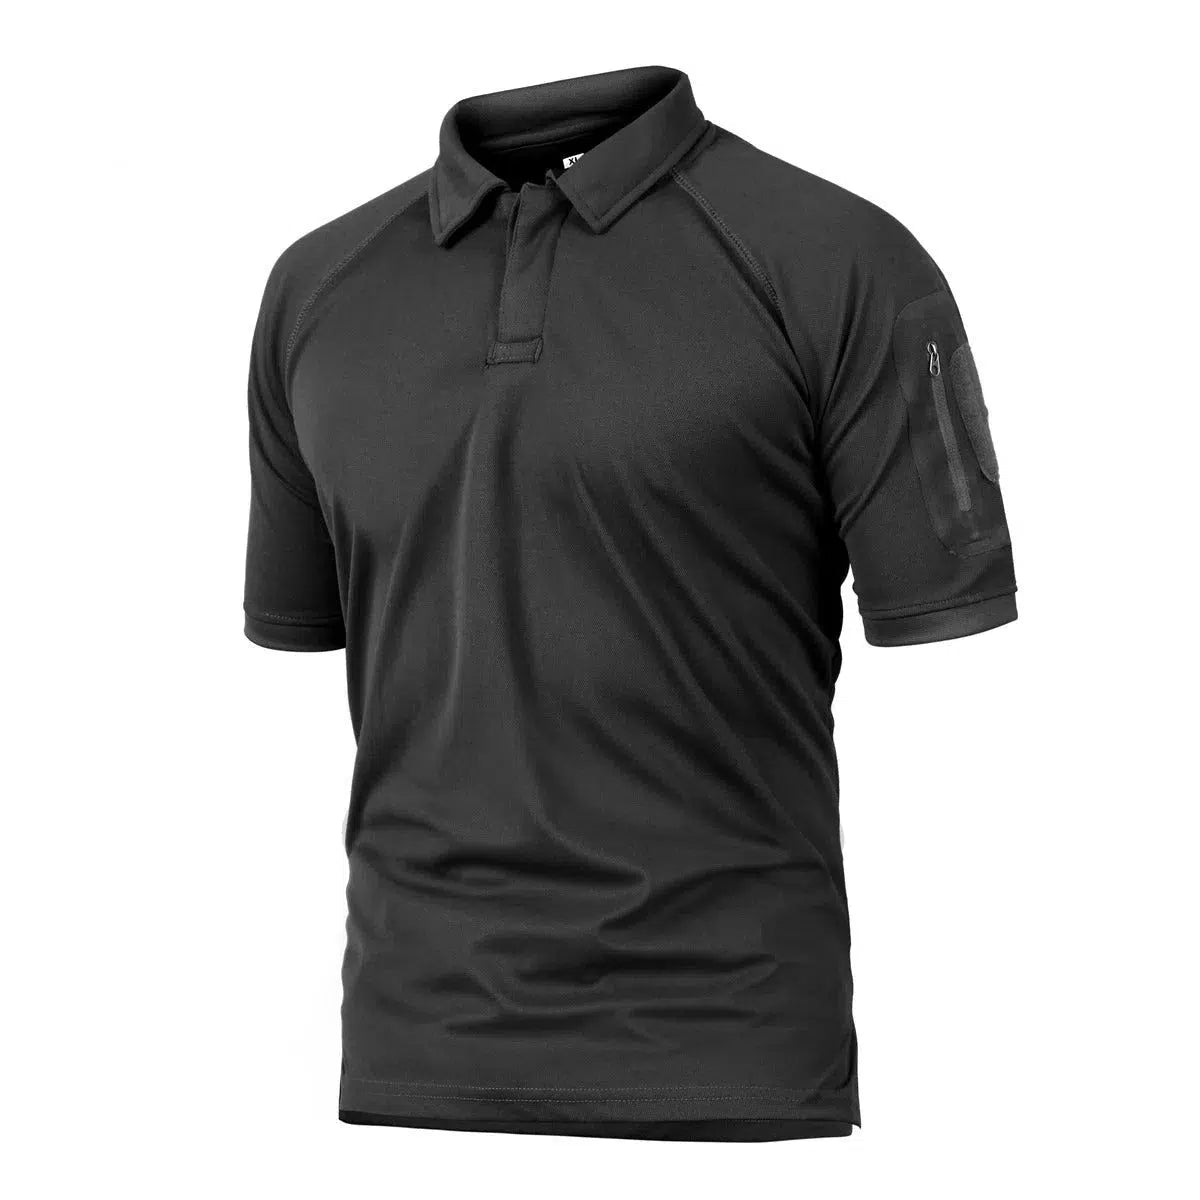 Tactical T-shirt Quick Dry Outdoor Breathable Sports Polo Shirt Lapel Short Sleeve Mountaineering on Foot Combat-Biu Blaster-Black- Biu Blaster